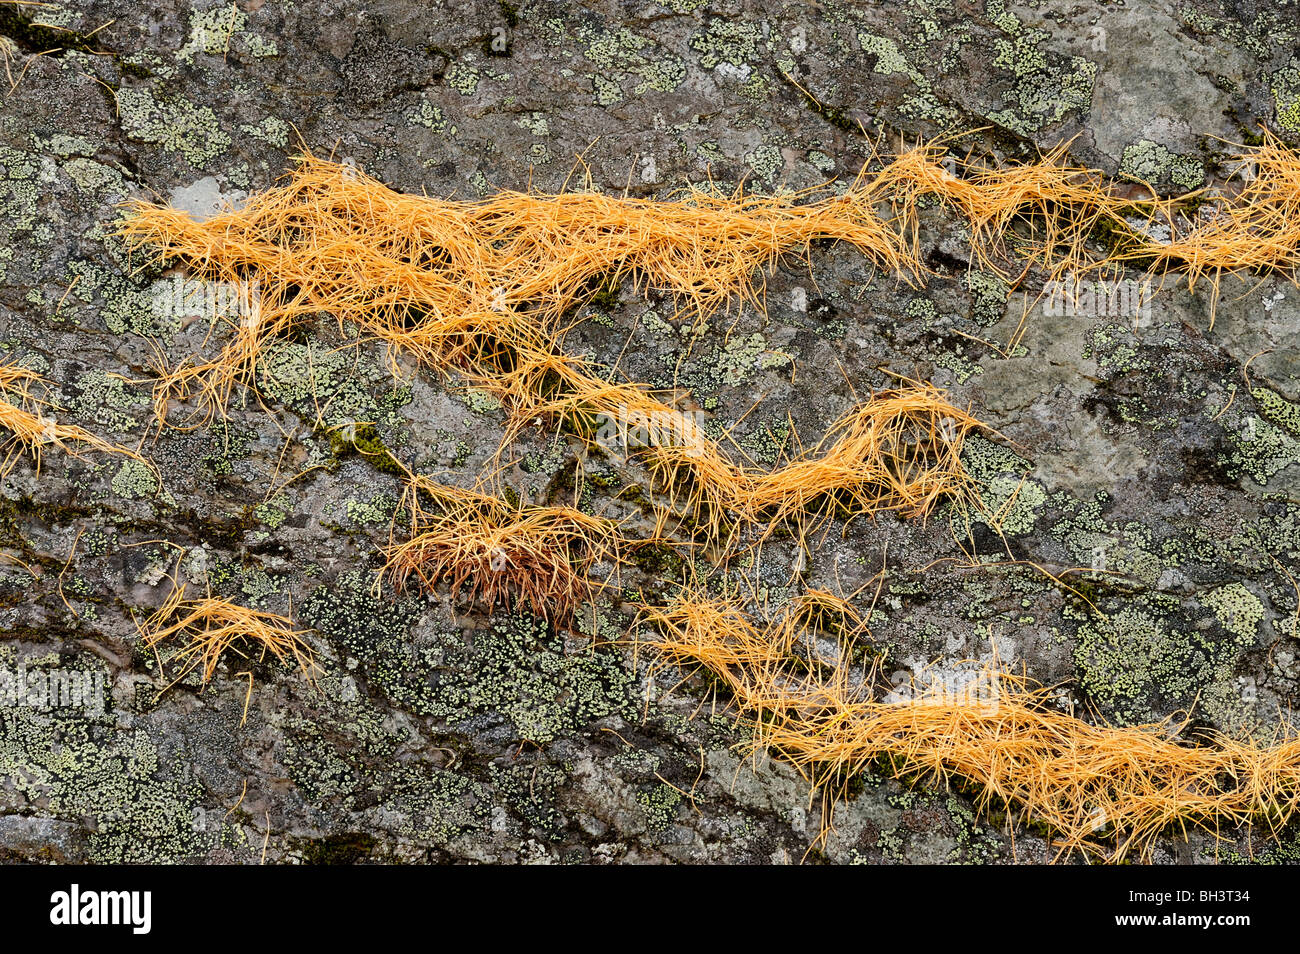 Rock outcrops with fallen larch needles, Western larch (Larix occidentalis), Yoho National Park, BC, Canada Stock Photo